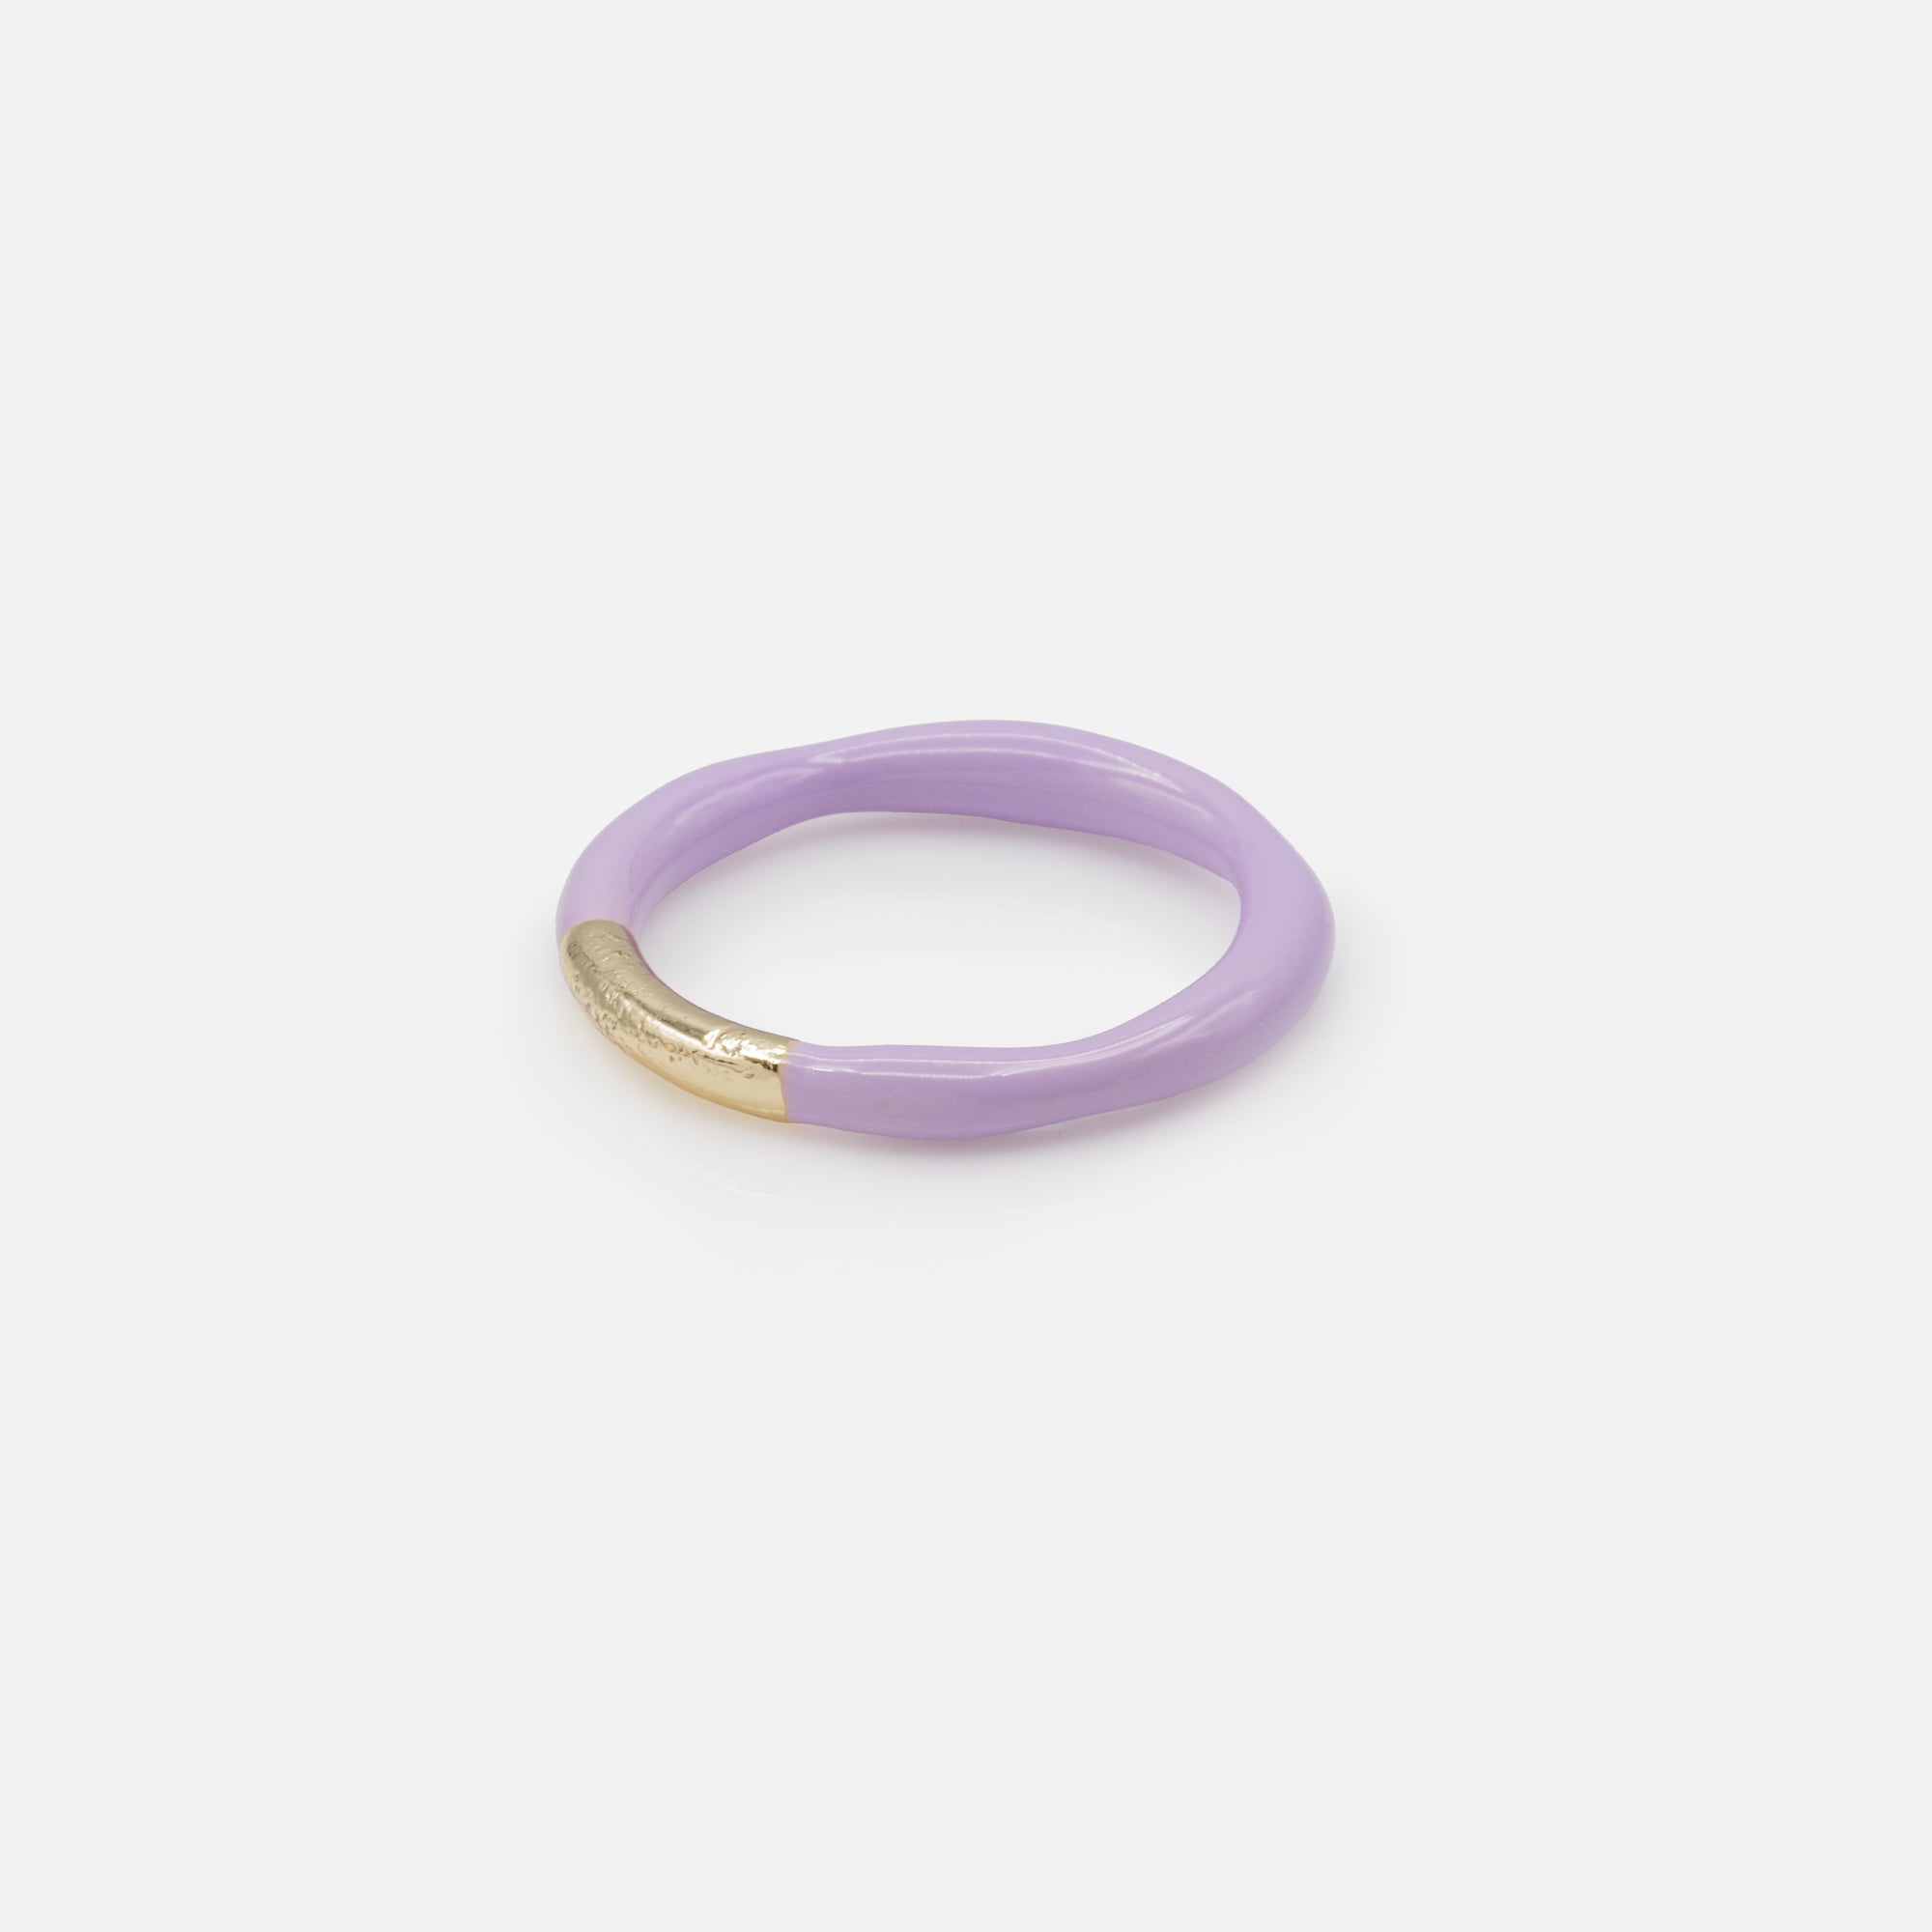 Set of three gold and lilac rings